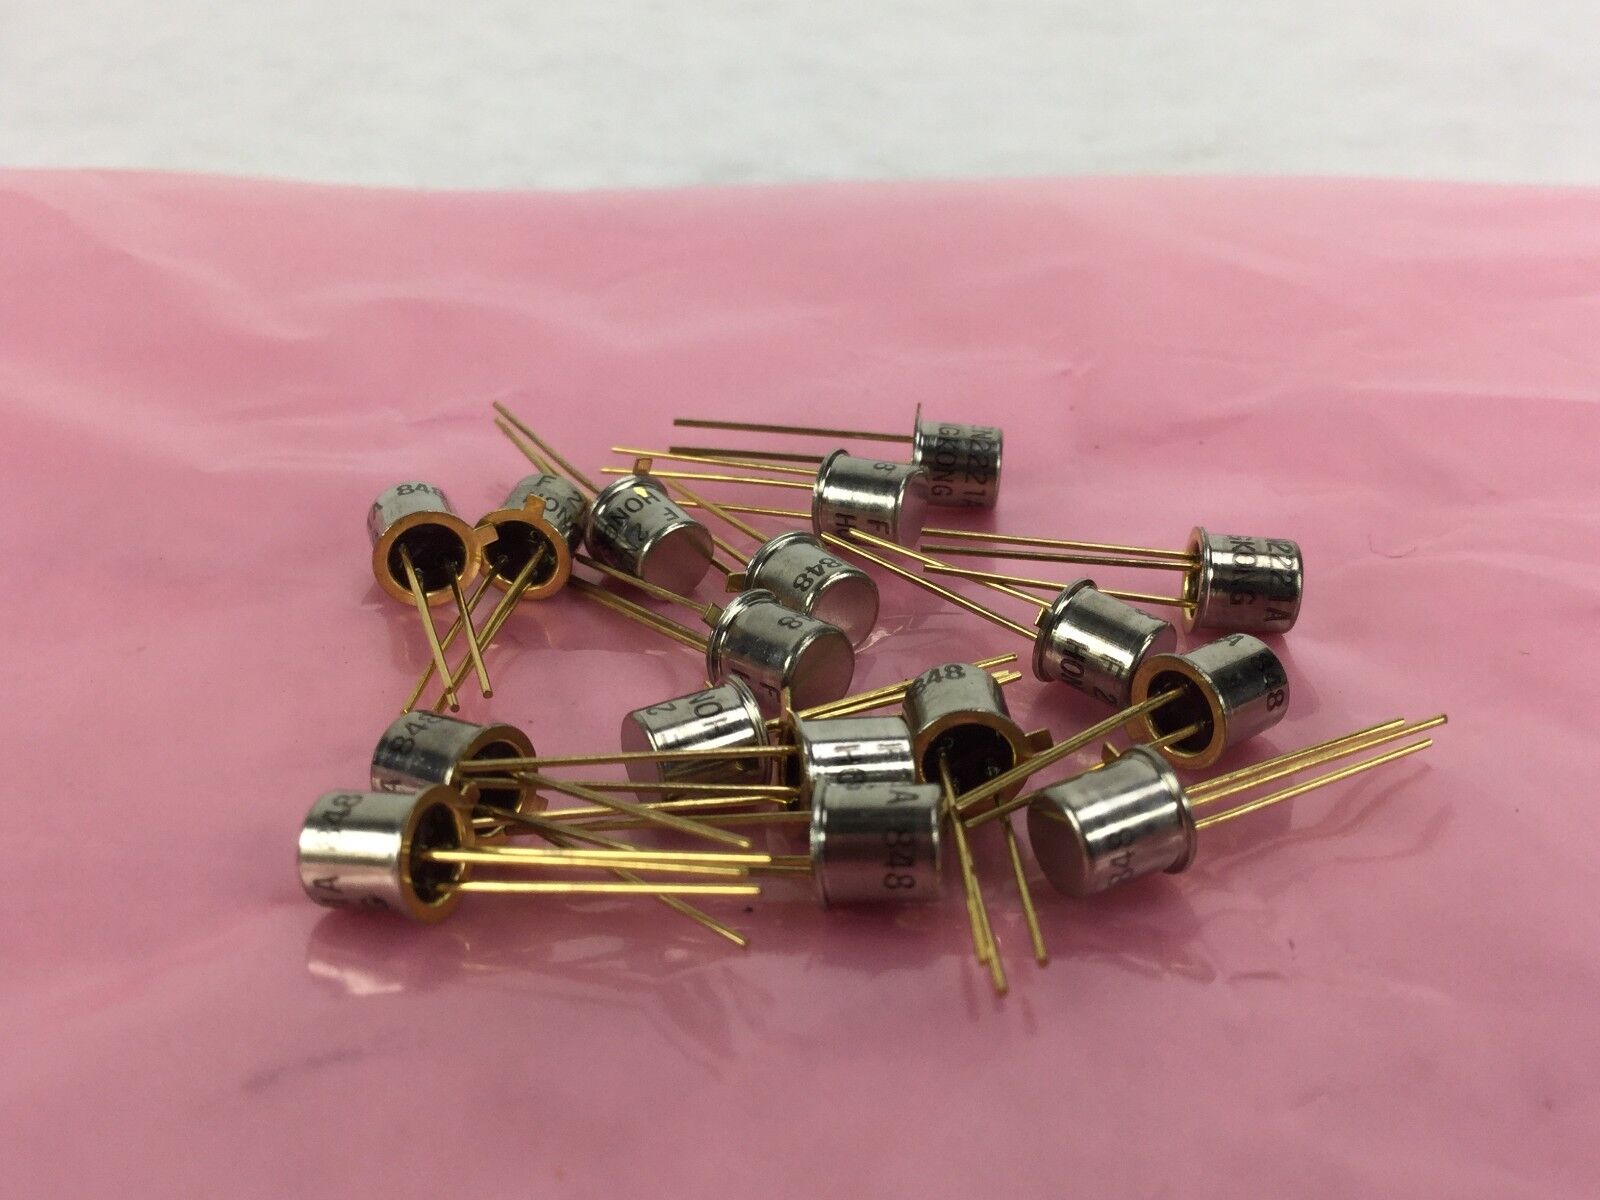 NEW Fairchild 2N2221A Bipolar Transistors - BJT, TO-18, Lot of 17, NEW